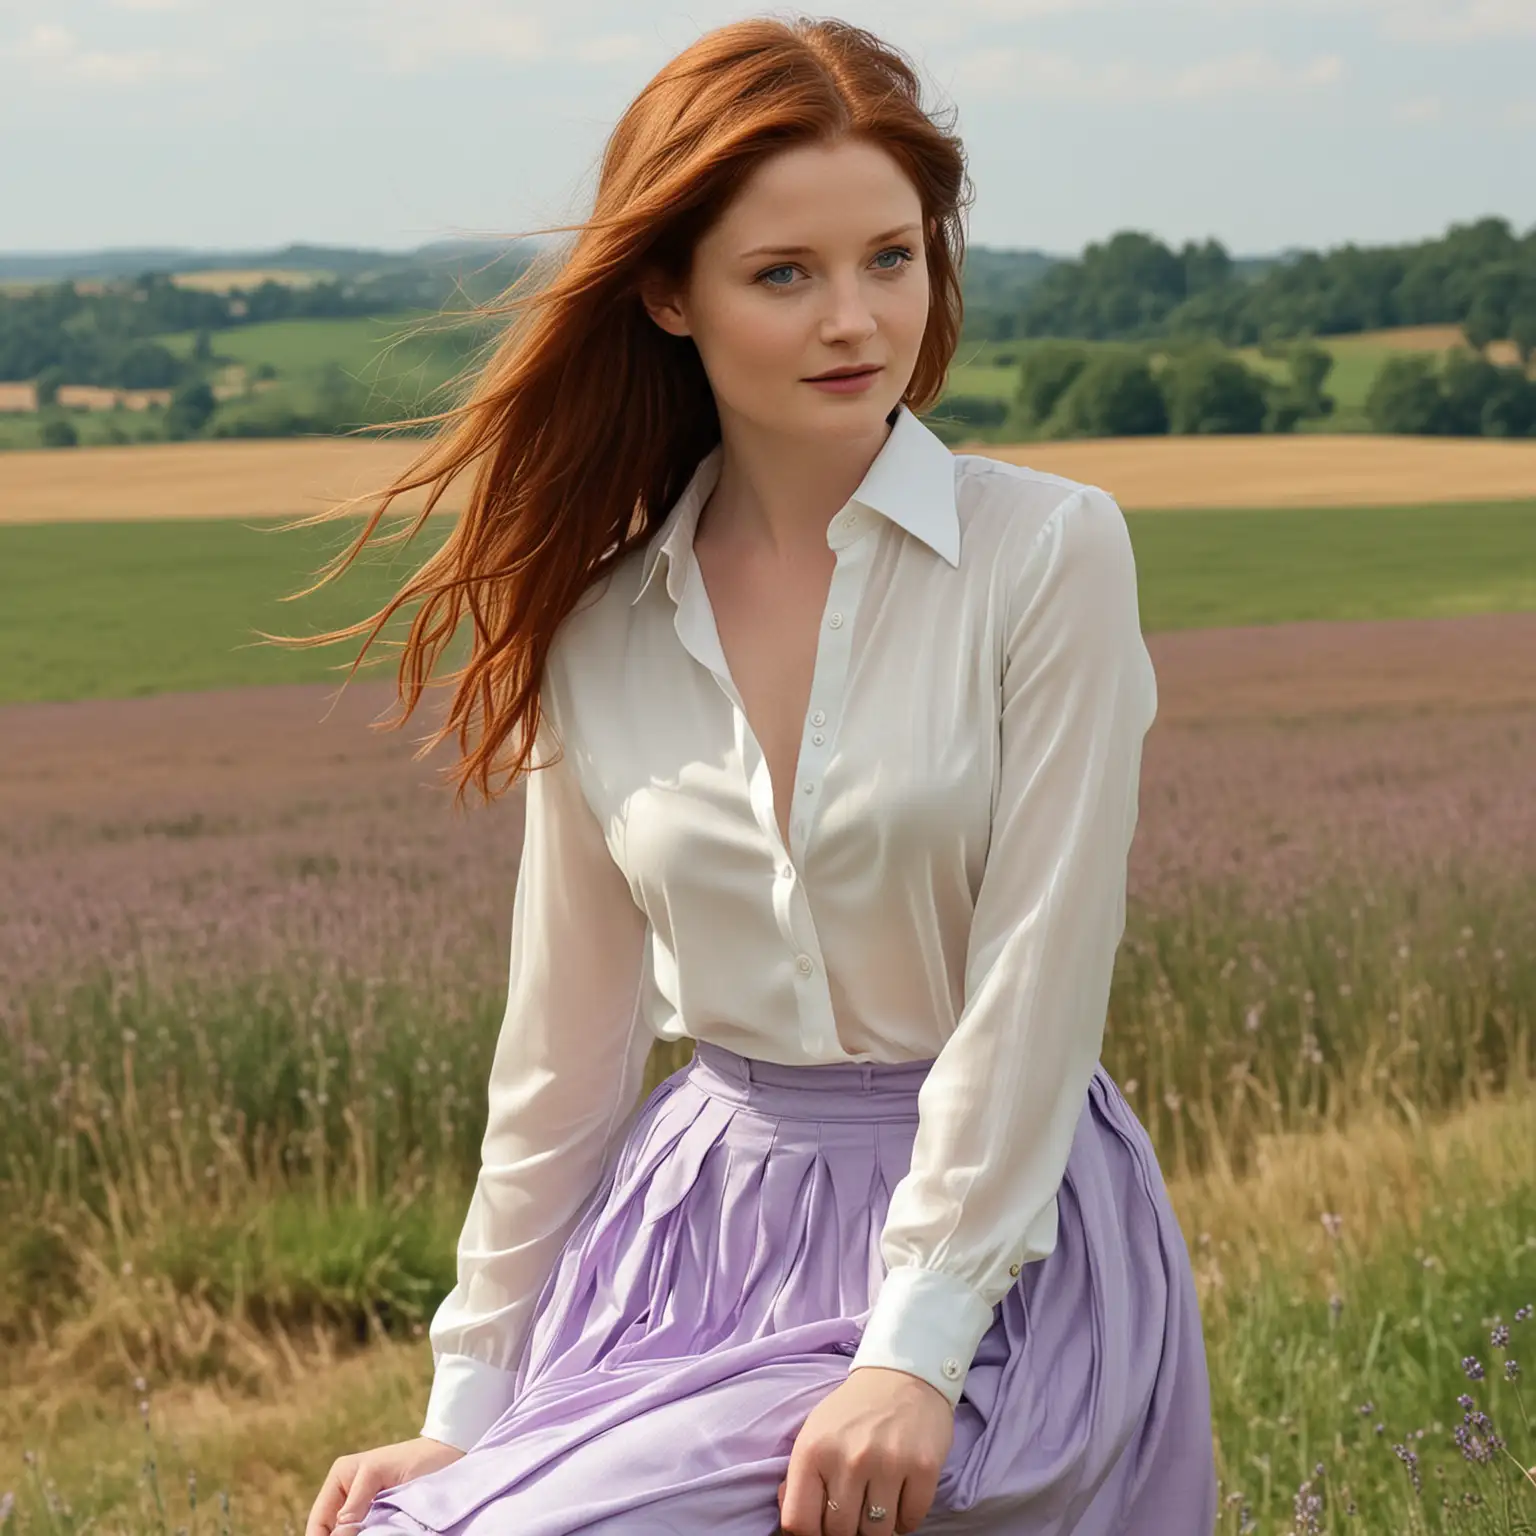 Bonnie Wright in Sensual Country Portrait